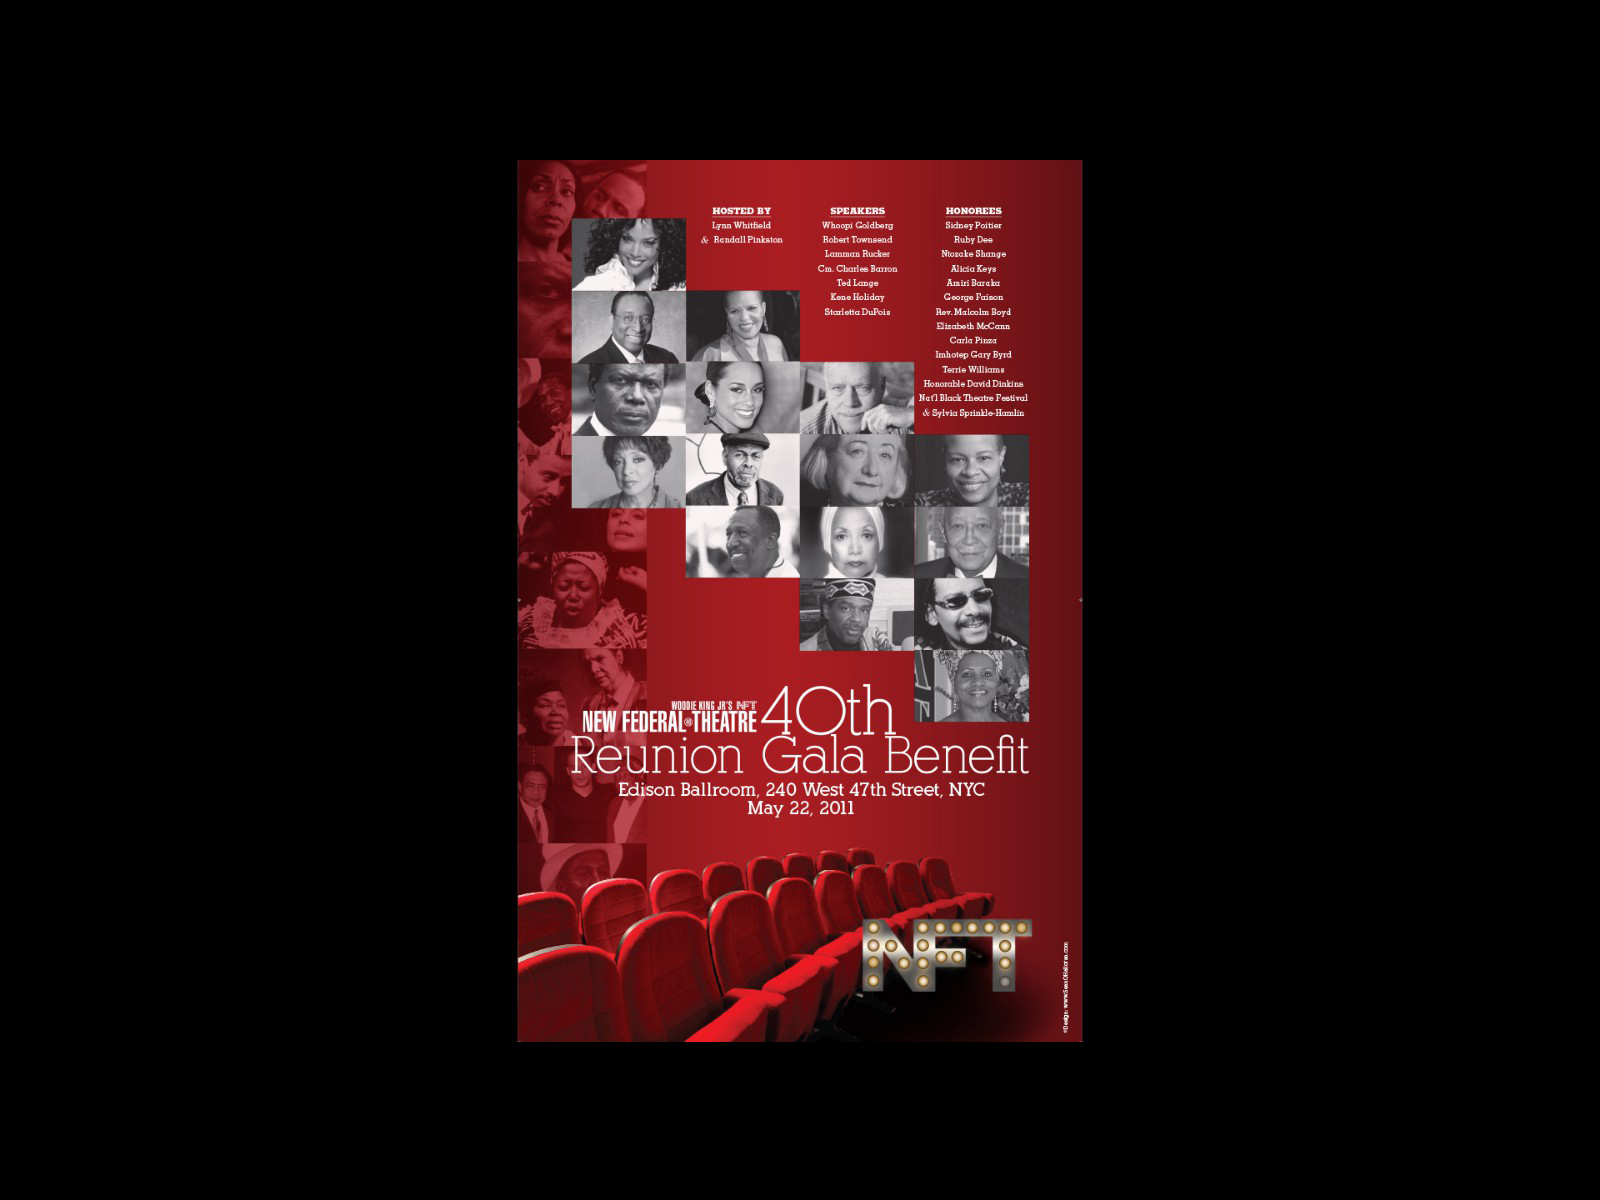 NFT 40th Anniversary Poster